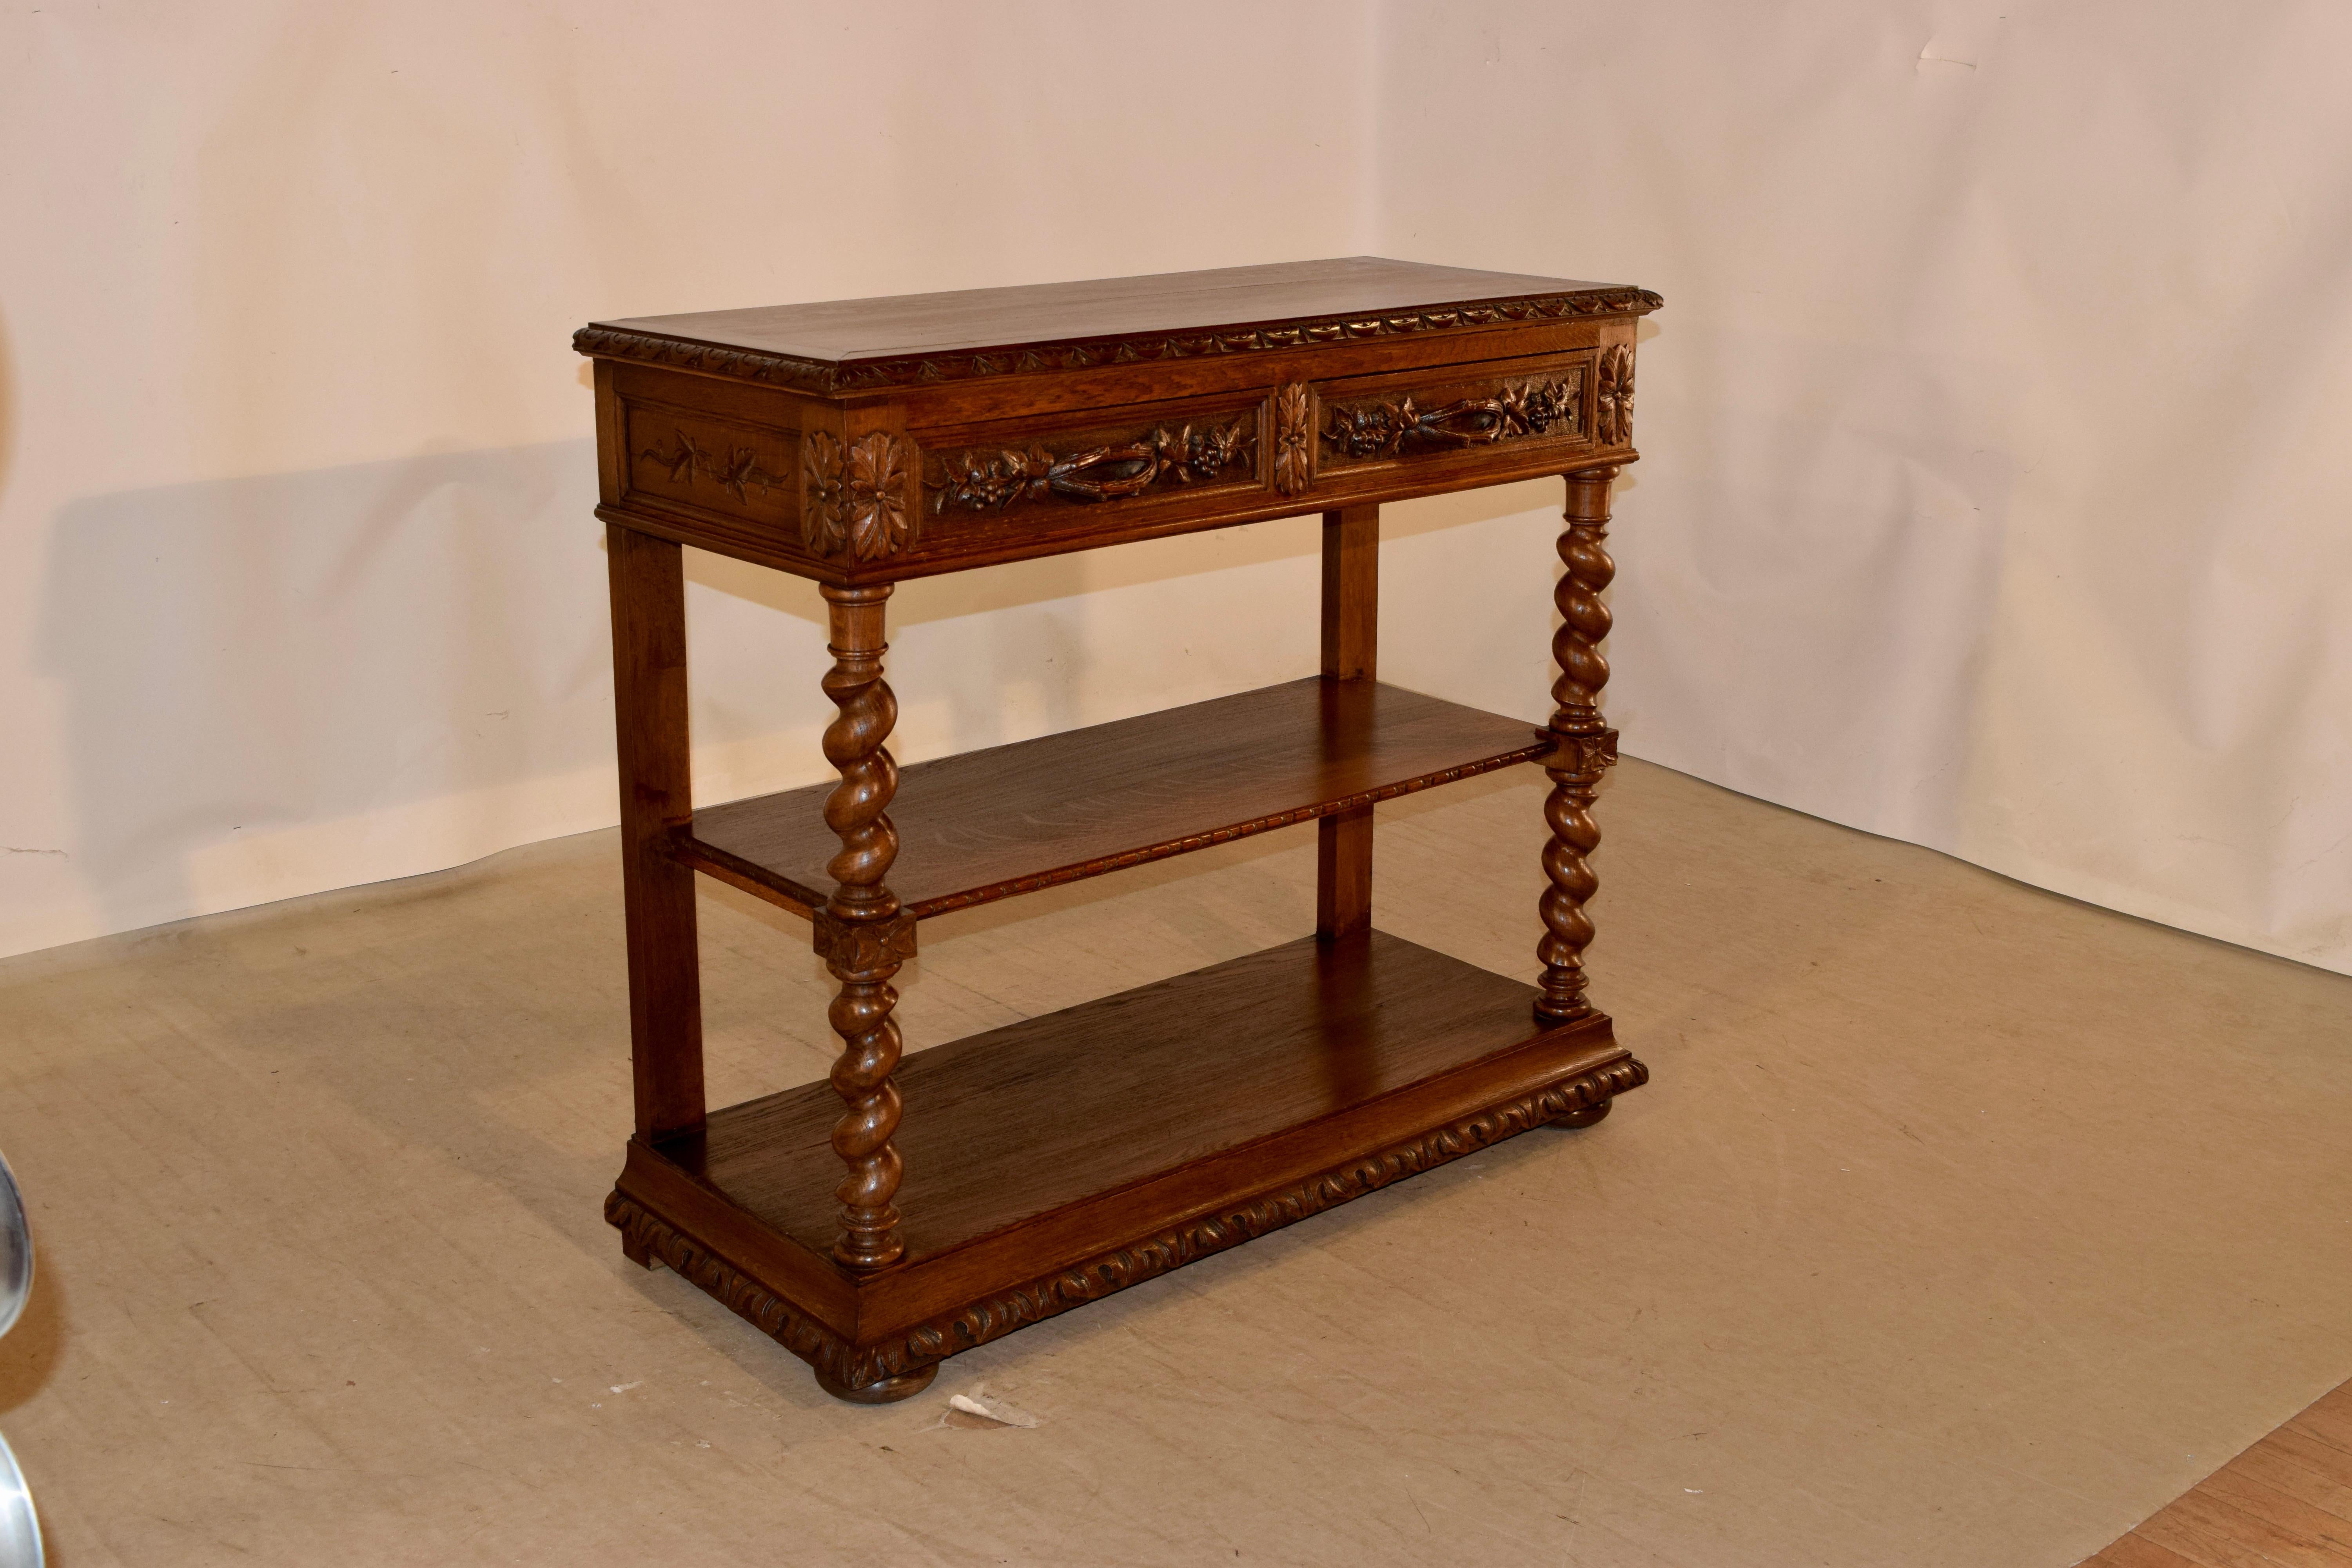 19th century oak dessert buffet from France with a banded top and a beveled and carved decorated edge, over two drawers with hand carved decorated drawer fronts along with hand carved pulls and paneled and carved sides. The legs are hand turned